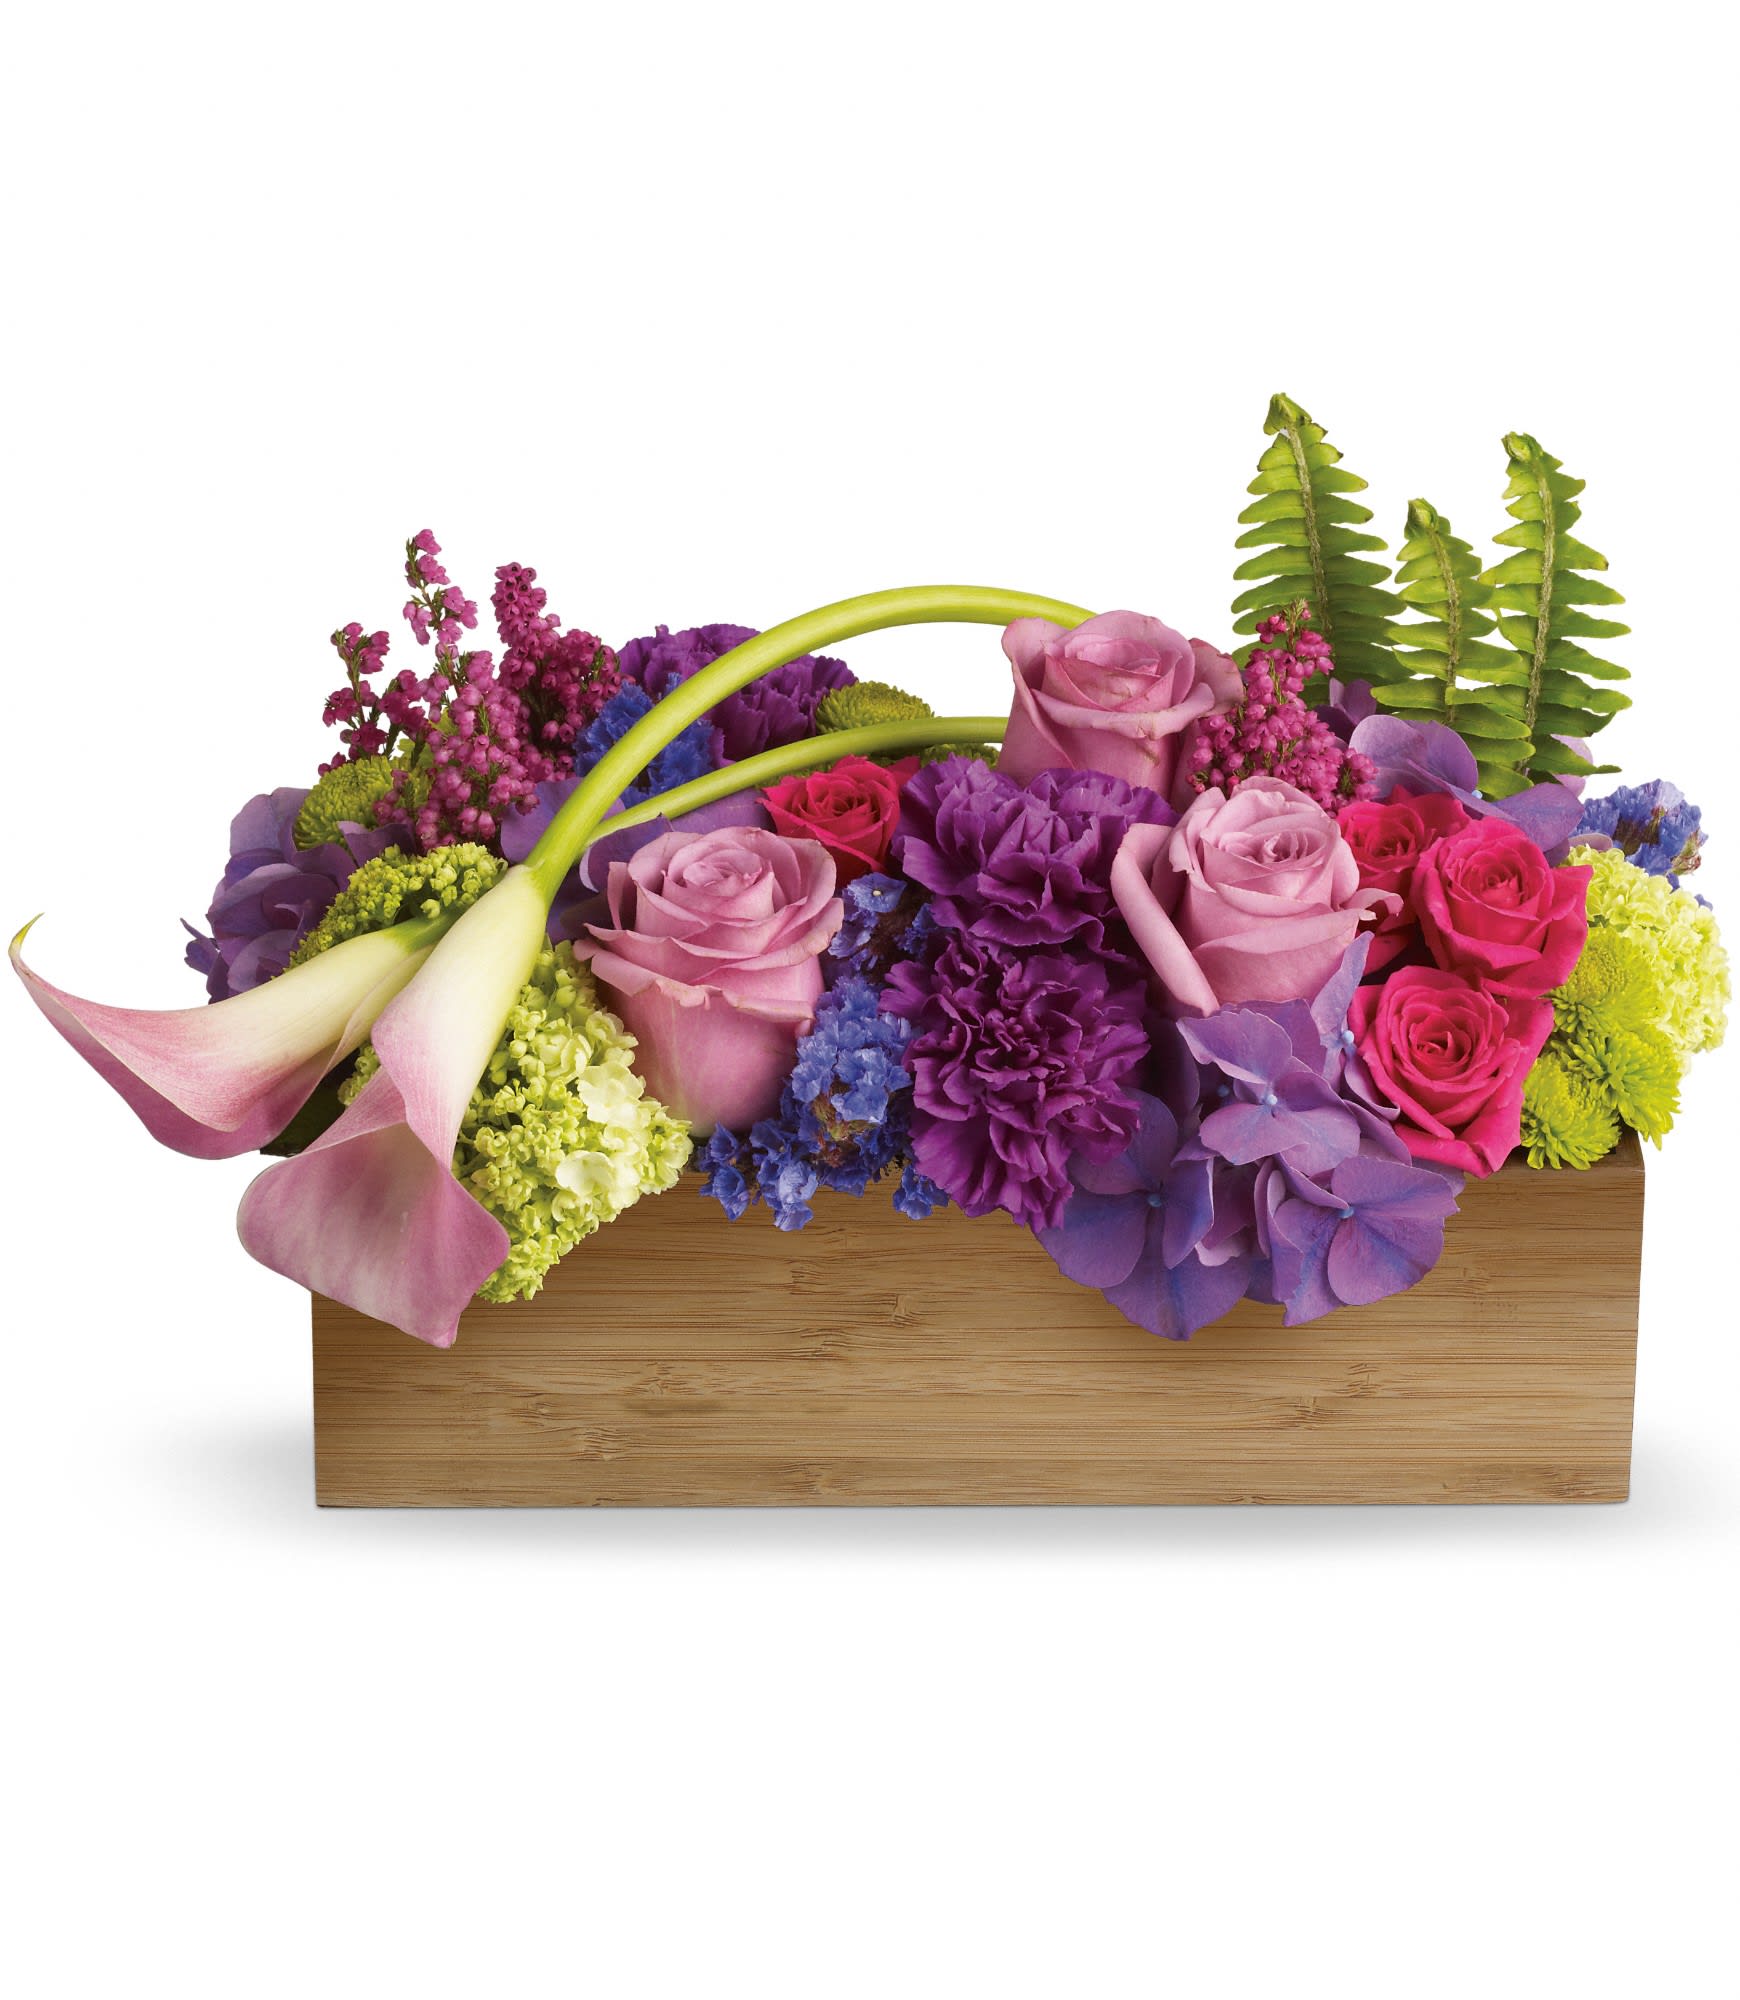 Teleflora's Ticket to Paradise  - If a floral version of paradise is what you're after, this incredible gift is just the ticket. A masterful assortment of tropical flowers and greens is amazingly arranged in a distinctive rectangular natural bamboo container. Absolutely stunning.    Lovely lavender hydrangea and roses, pink miniature callas, hot pink spray roses, purple carnations, heather, fern and more fill a natural bamboo container.    Approximately 14&quot; W x 9&quot; H    Orientation: One-Sided        As Shown : T81-3A      Deluxe : T81-3B      Premium : T81-3C    